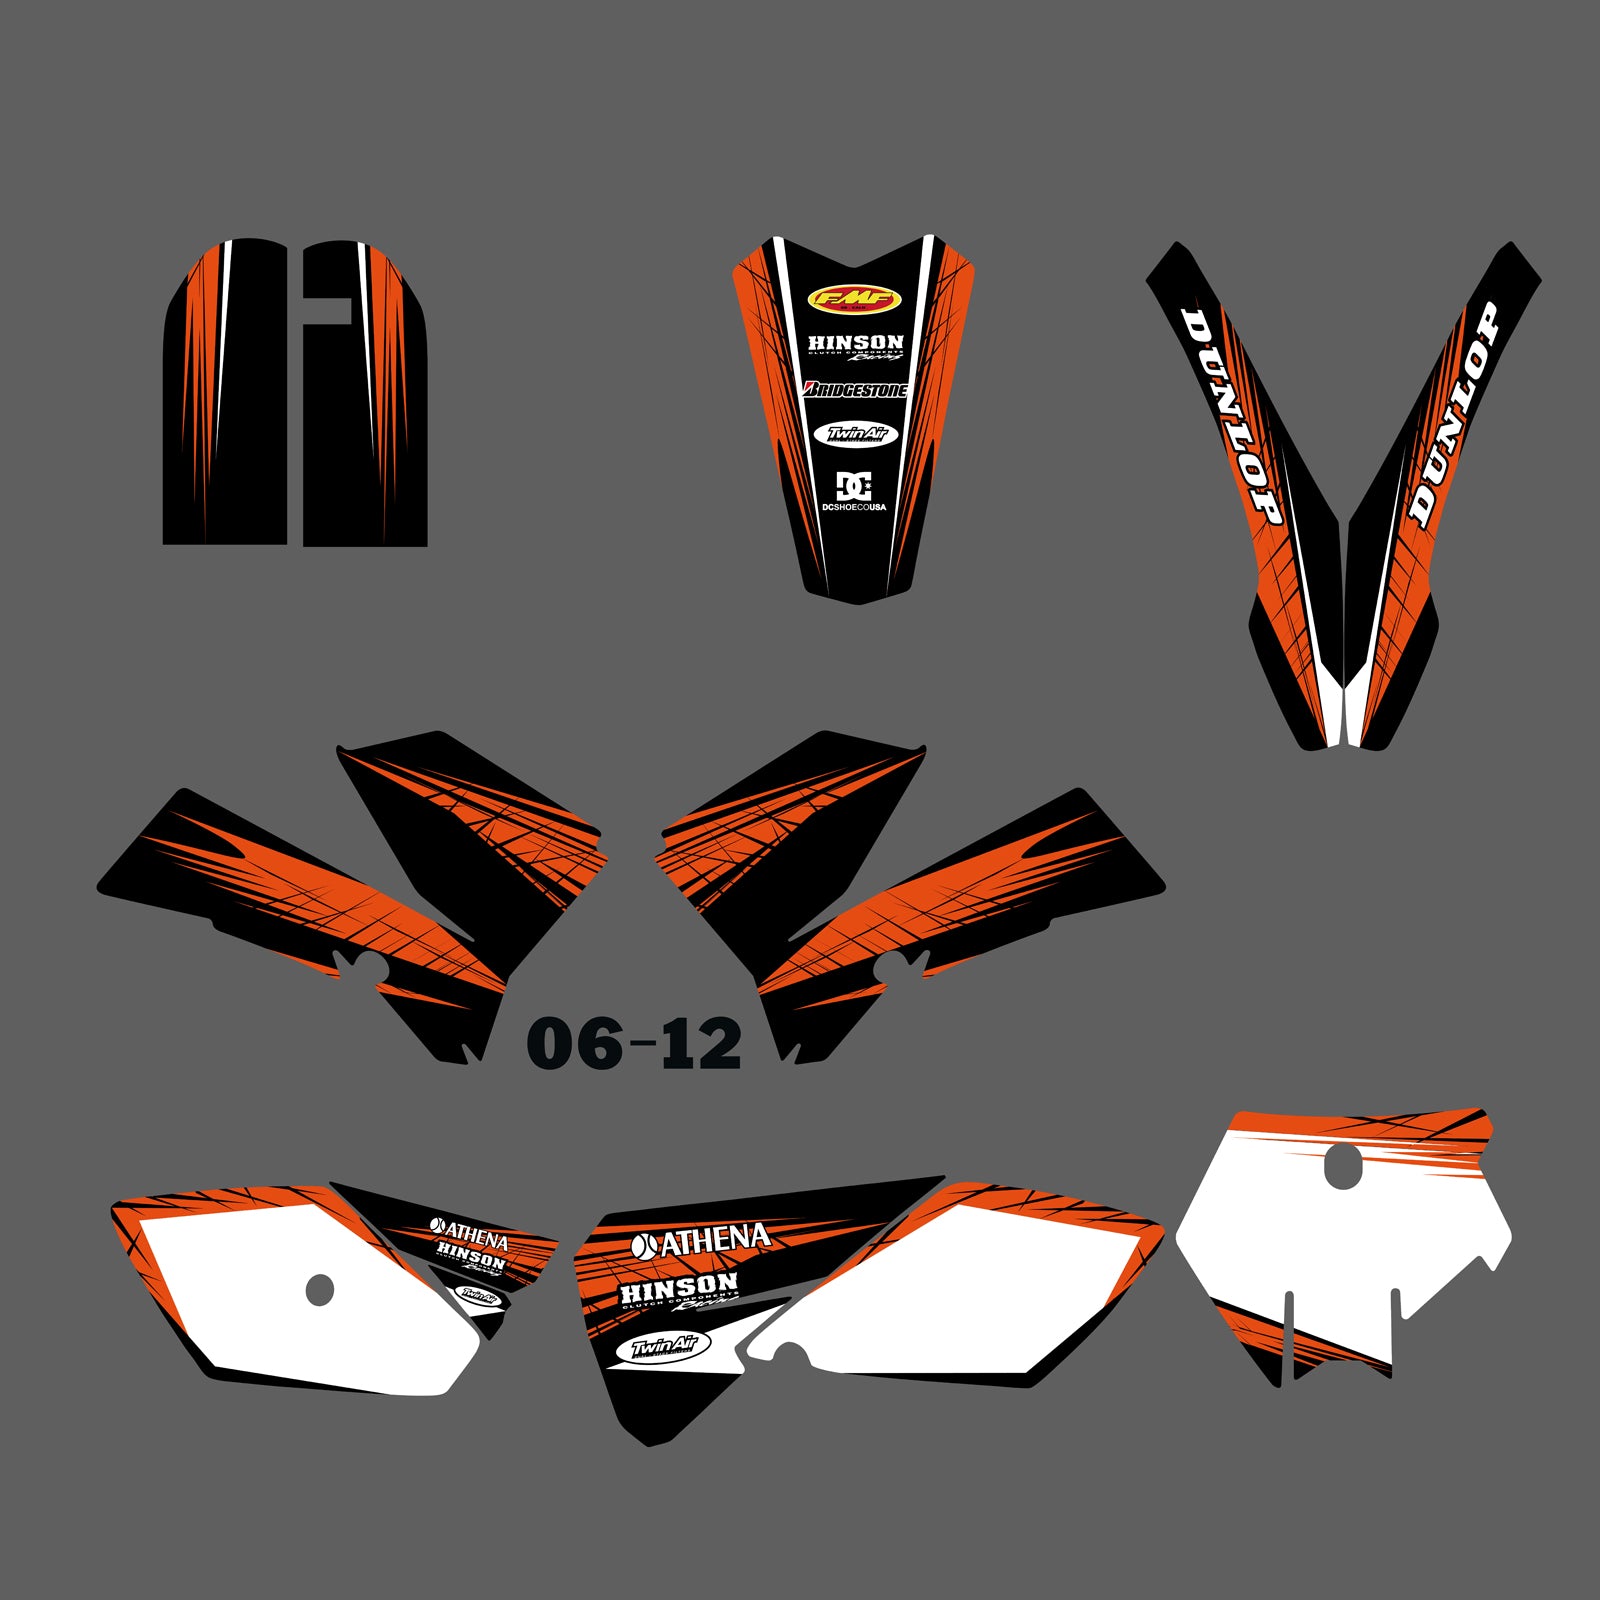 Motorcycle Full Graphics Background Sticker Decal Kits for KTM SX 85-105 2006-2012